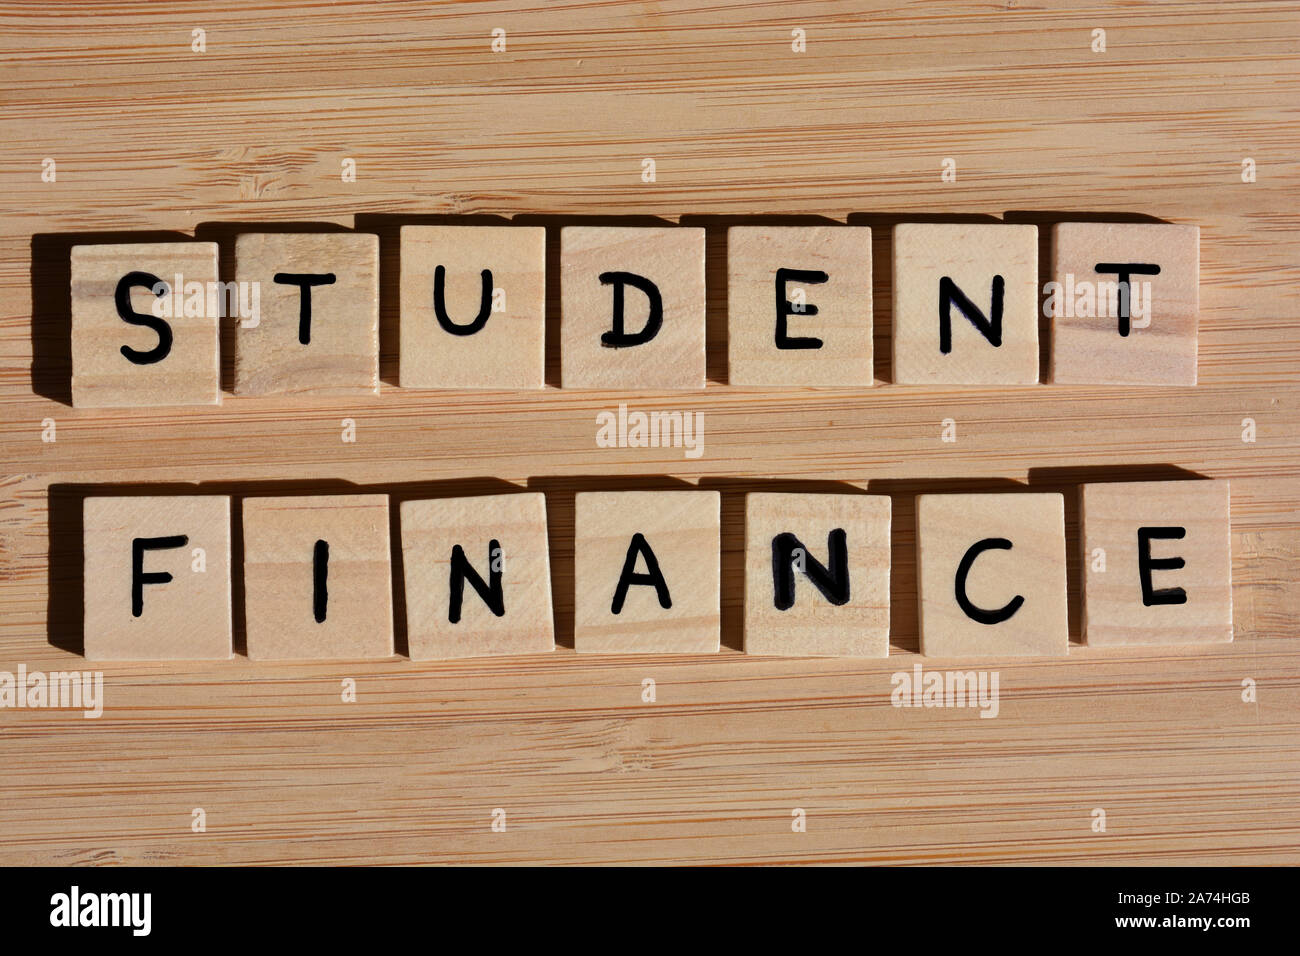 Student Finance, Word in 3d wooden alphabet letters on a wooden bamboo background Stock Photo